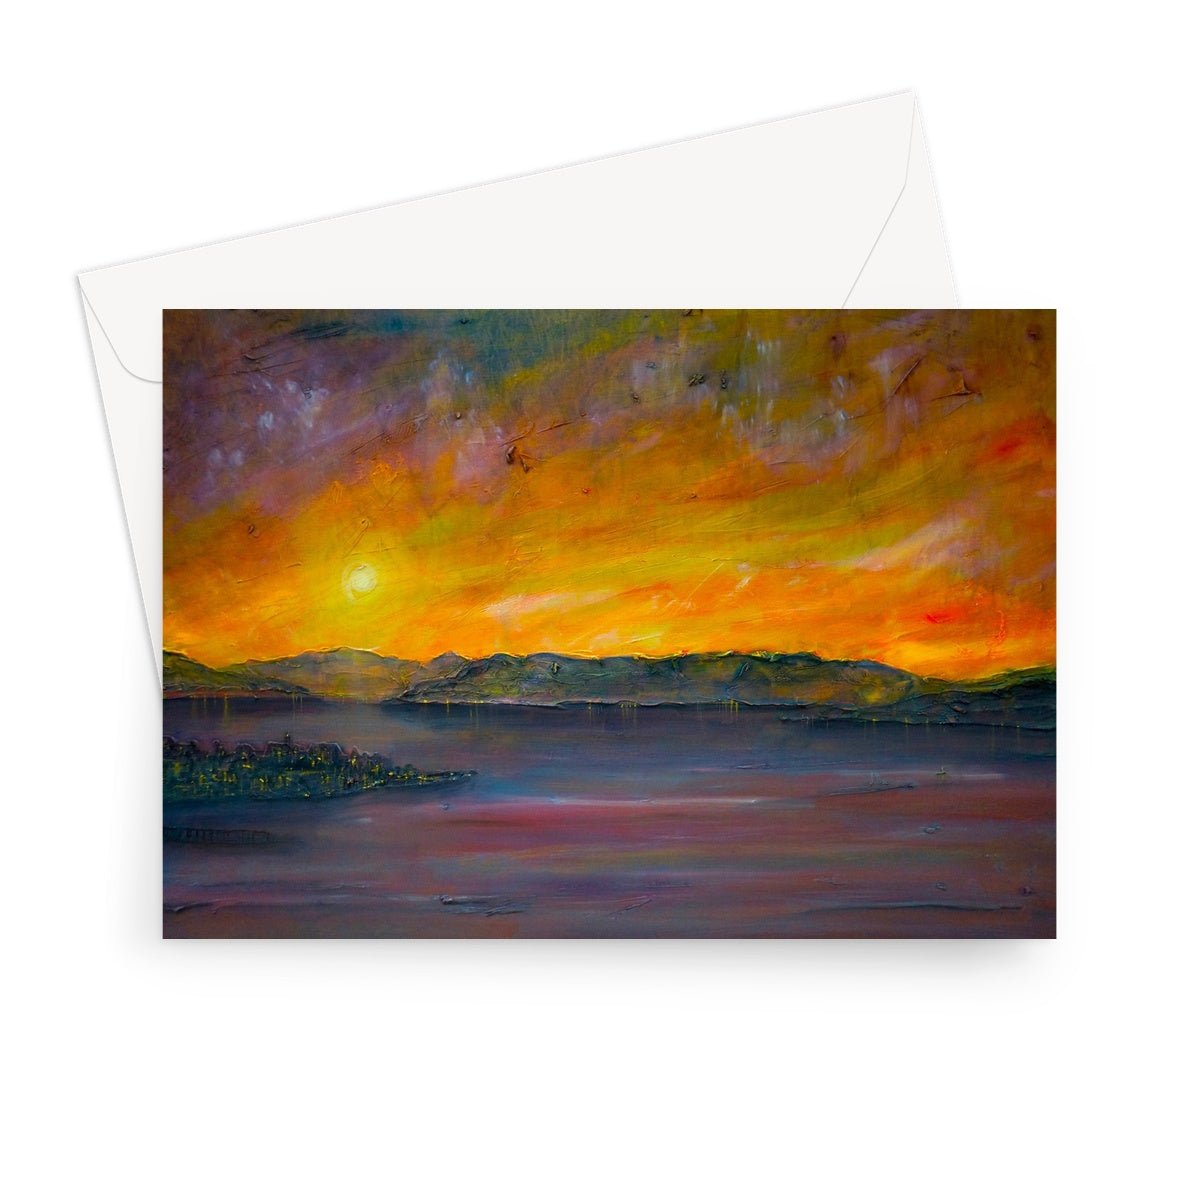 Sunset Over Gourock Art Gifts Greeting Card-Greetings Cards-River Clyde Art Gallery-7"x5"-10 Cards-Paintings, Prints, Homeware, Art Gifts From Scotland By Scottish Artist Kevin Hunter